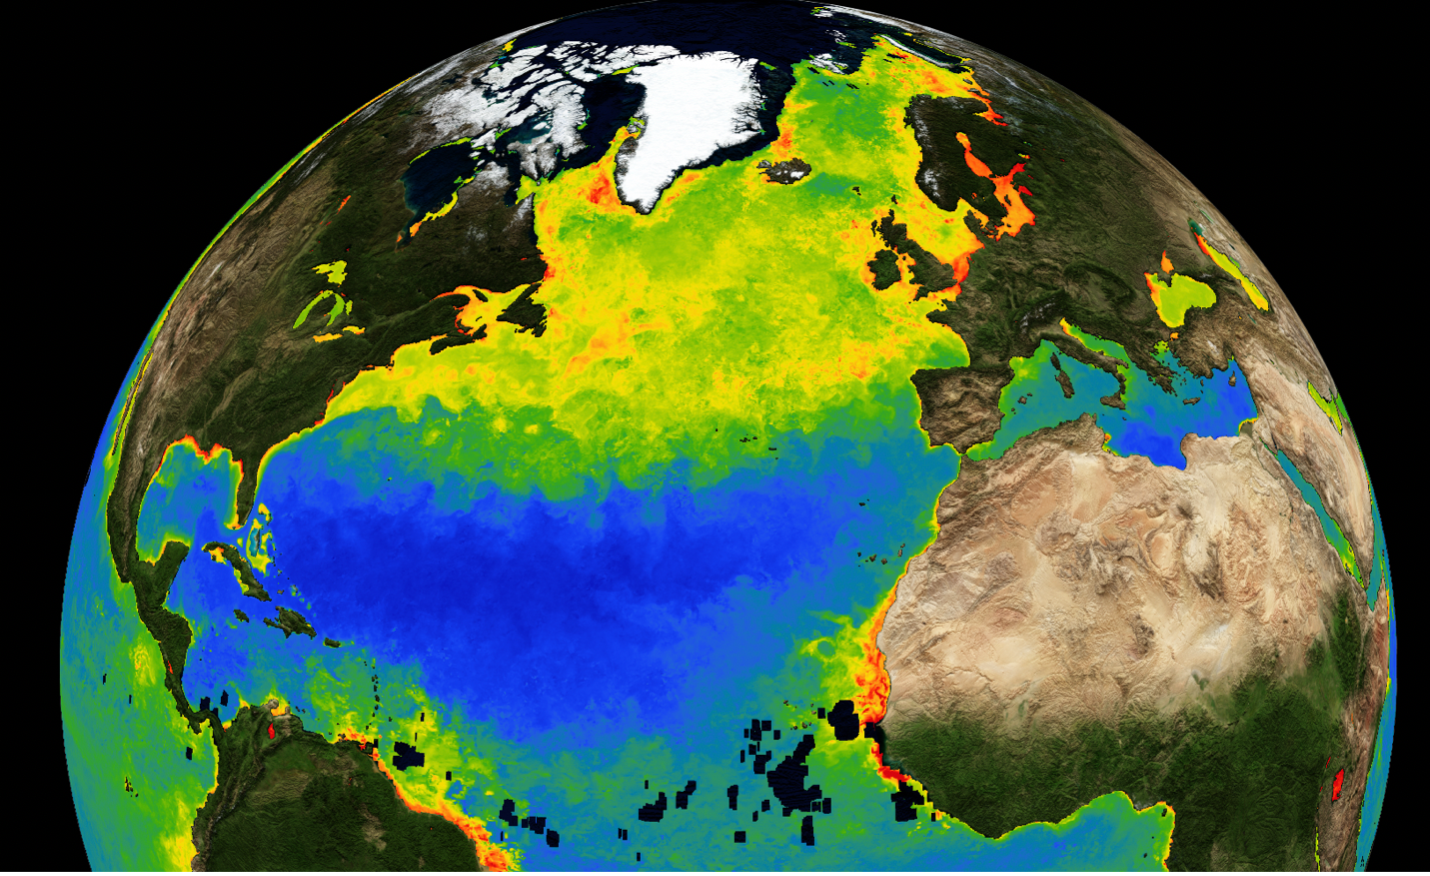 Planetary Warming Leads to Seasonal Shifts in Phytoplankton Blooms